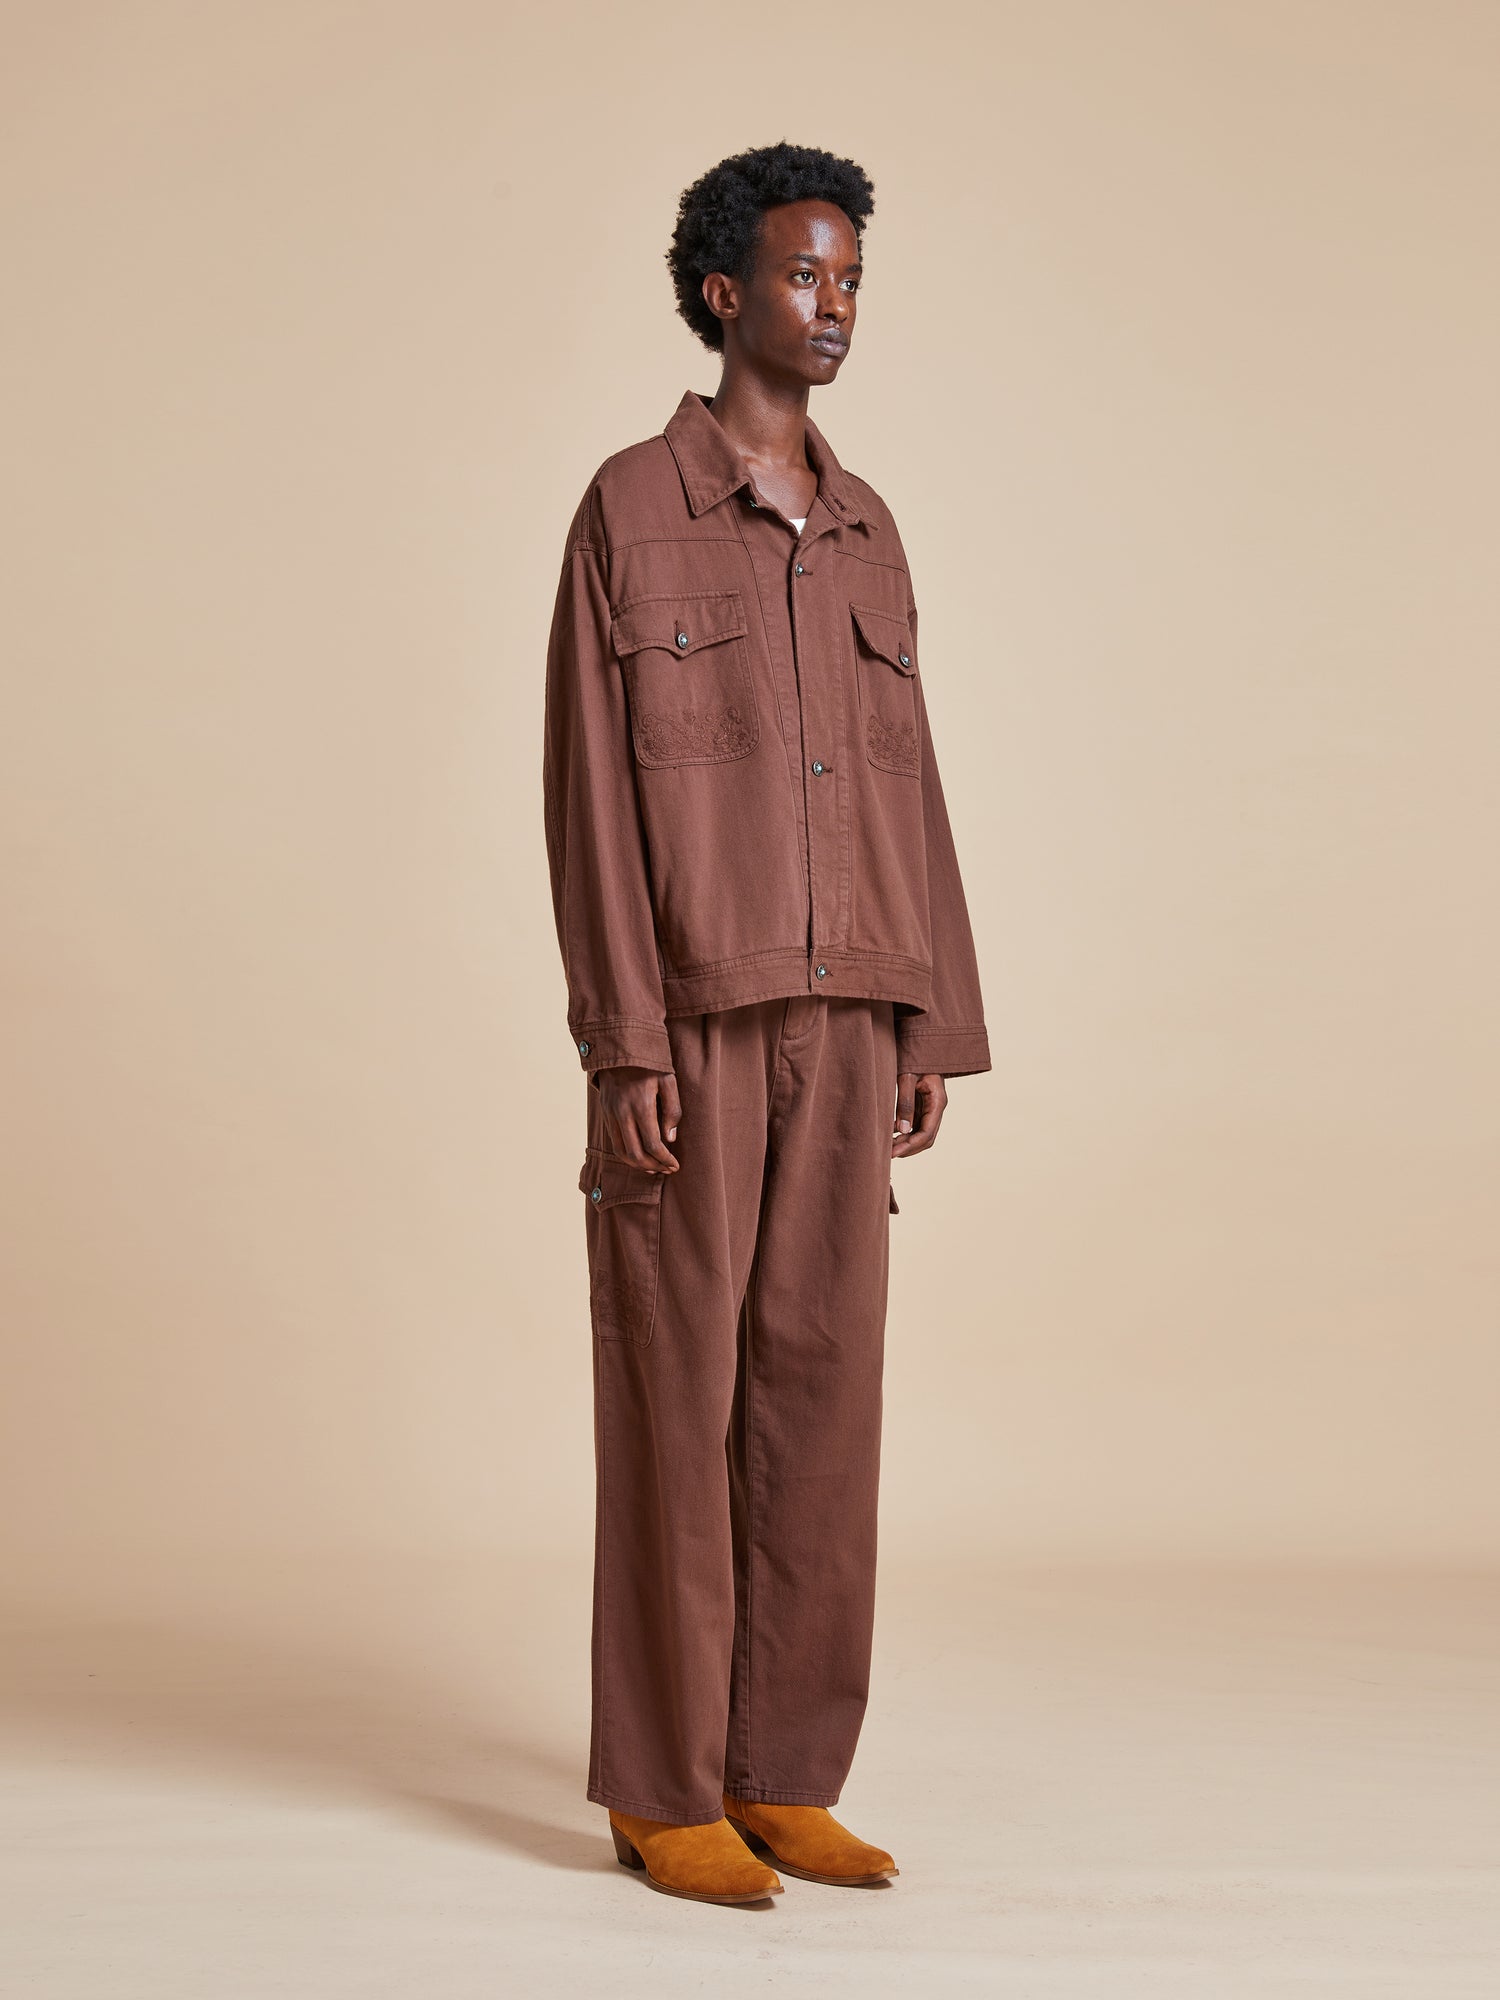 The model is wearing a brown Dusky Western Trucker Jacket and a brown cargo pants.